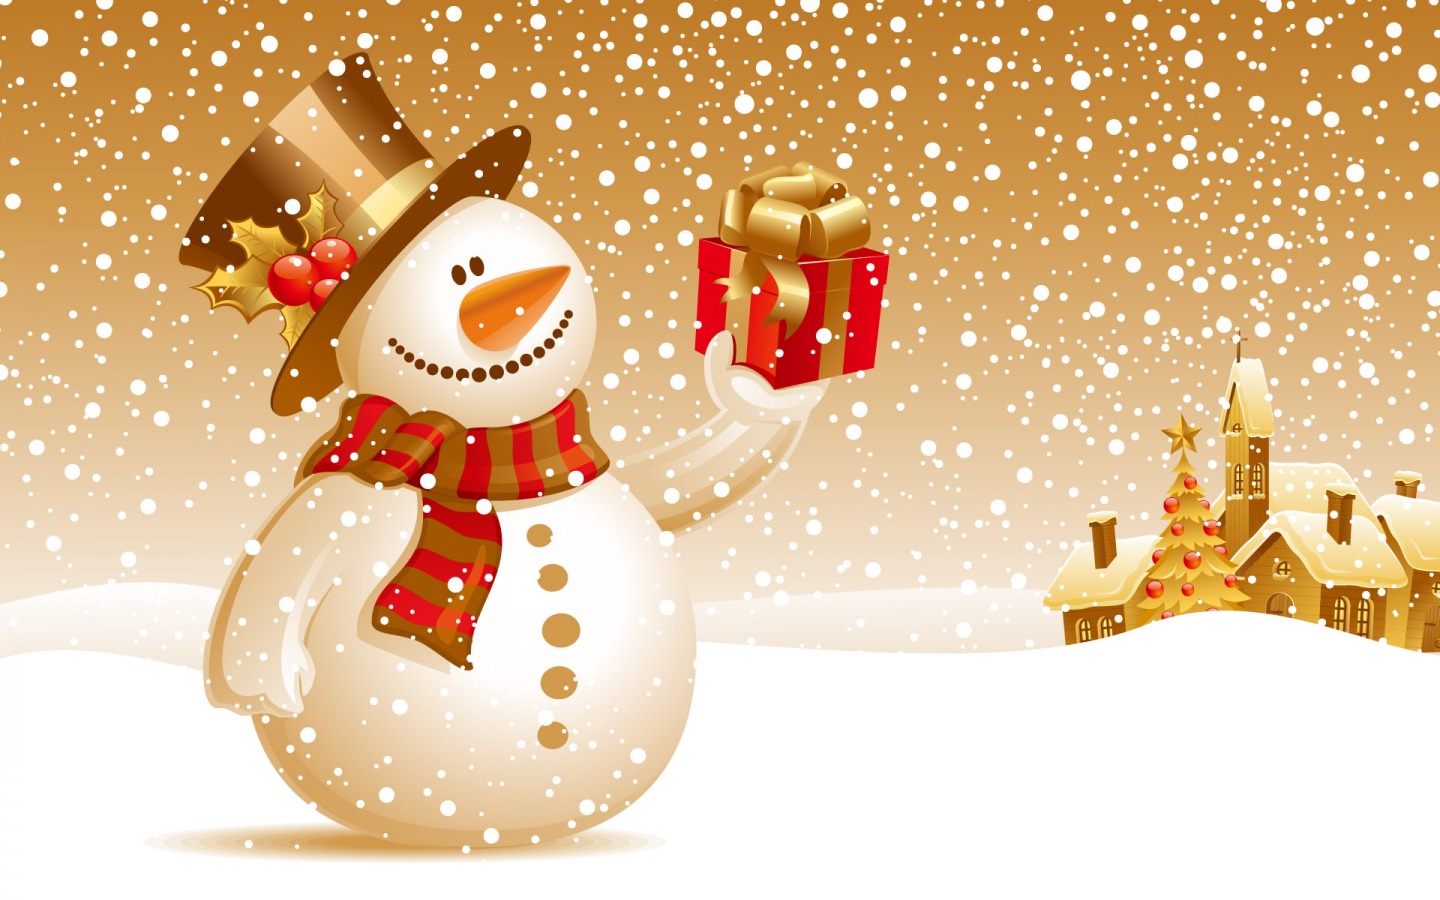 Christmas snowman wallpaper with gifts free powerpoint background